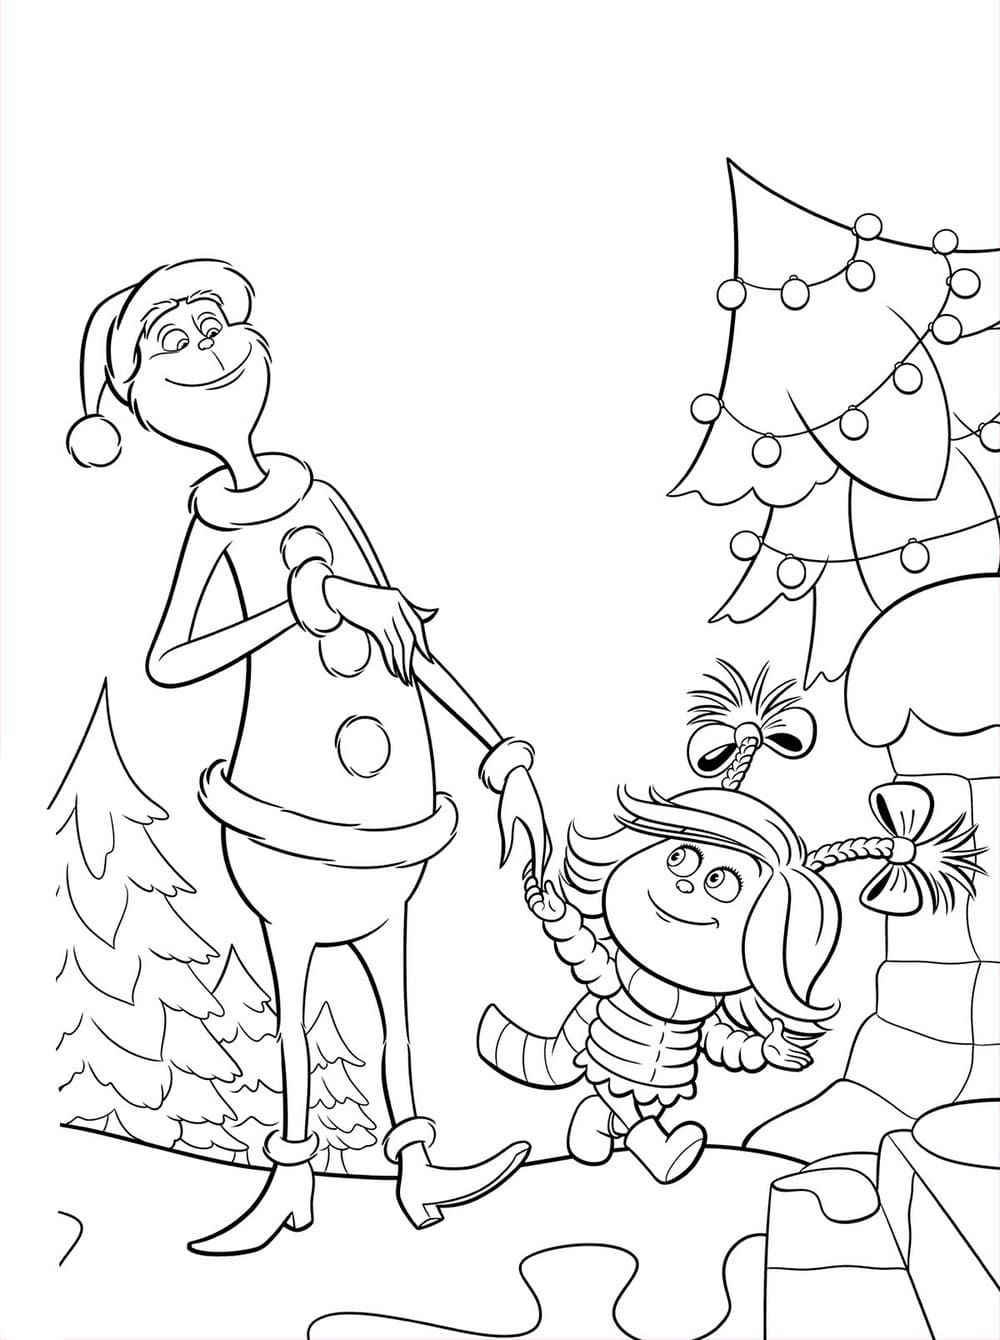 705 Cartoon Cindy Lou Who Coloring Page with Printable